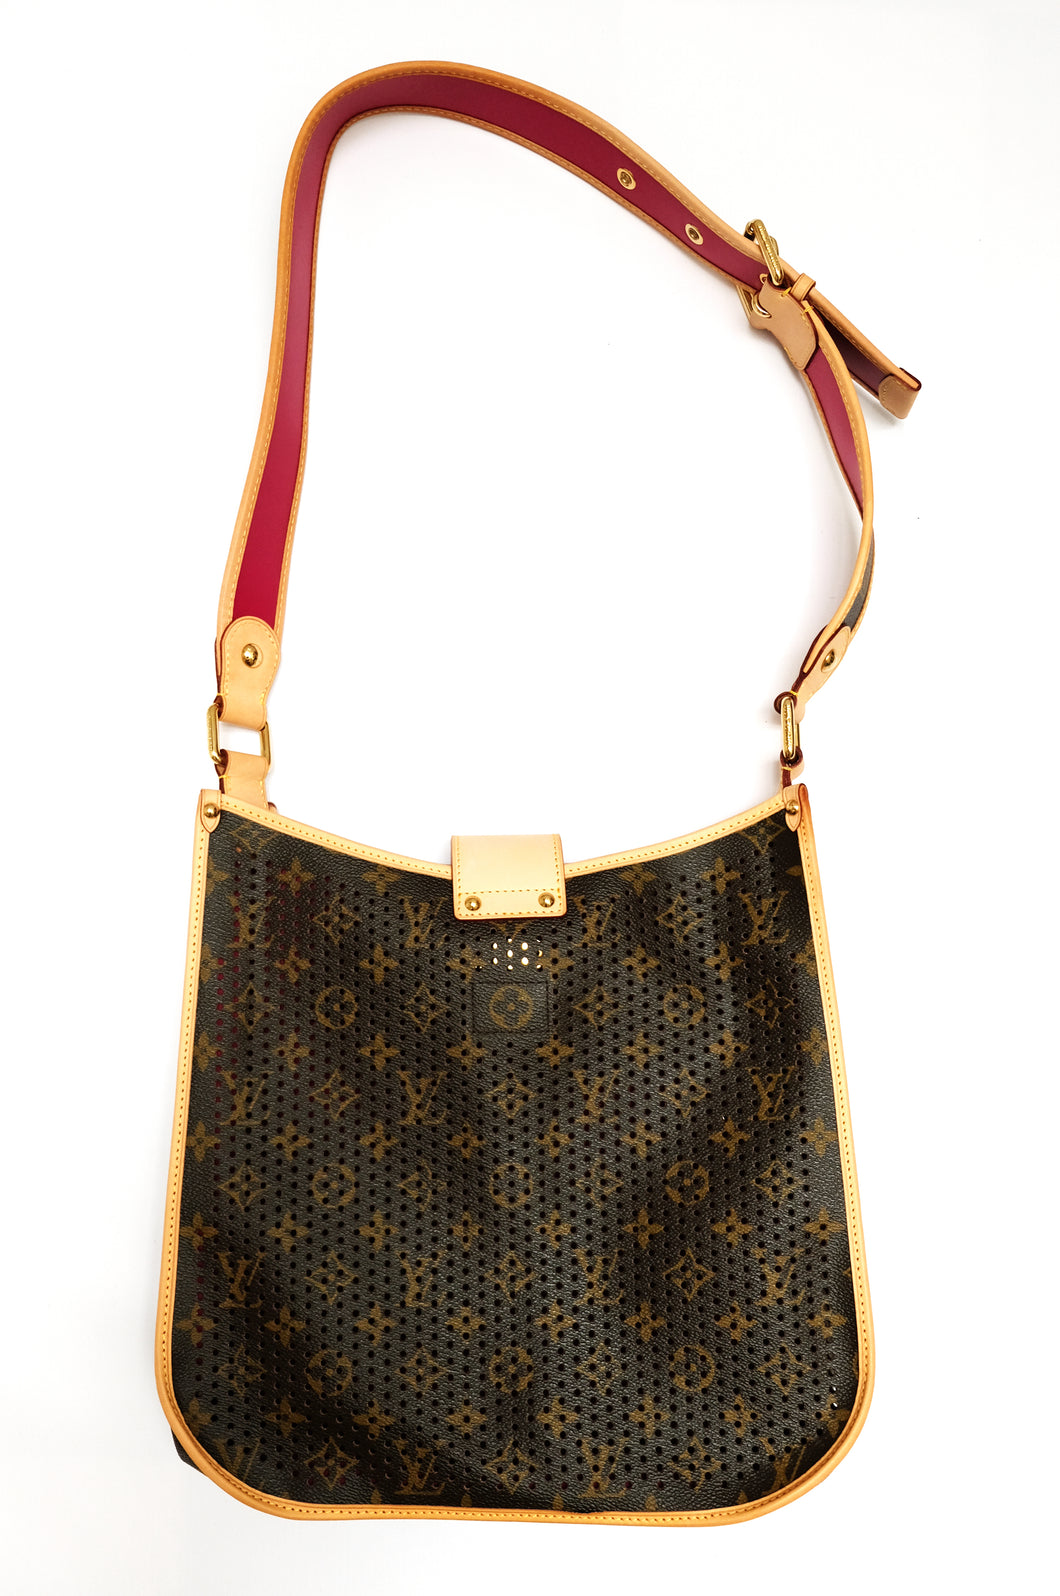 Louis Vuitton Limited Edition Fuchsia Monogram Perforated Musette